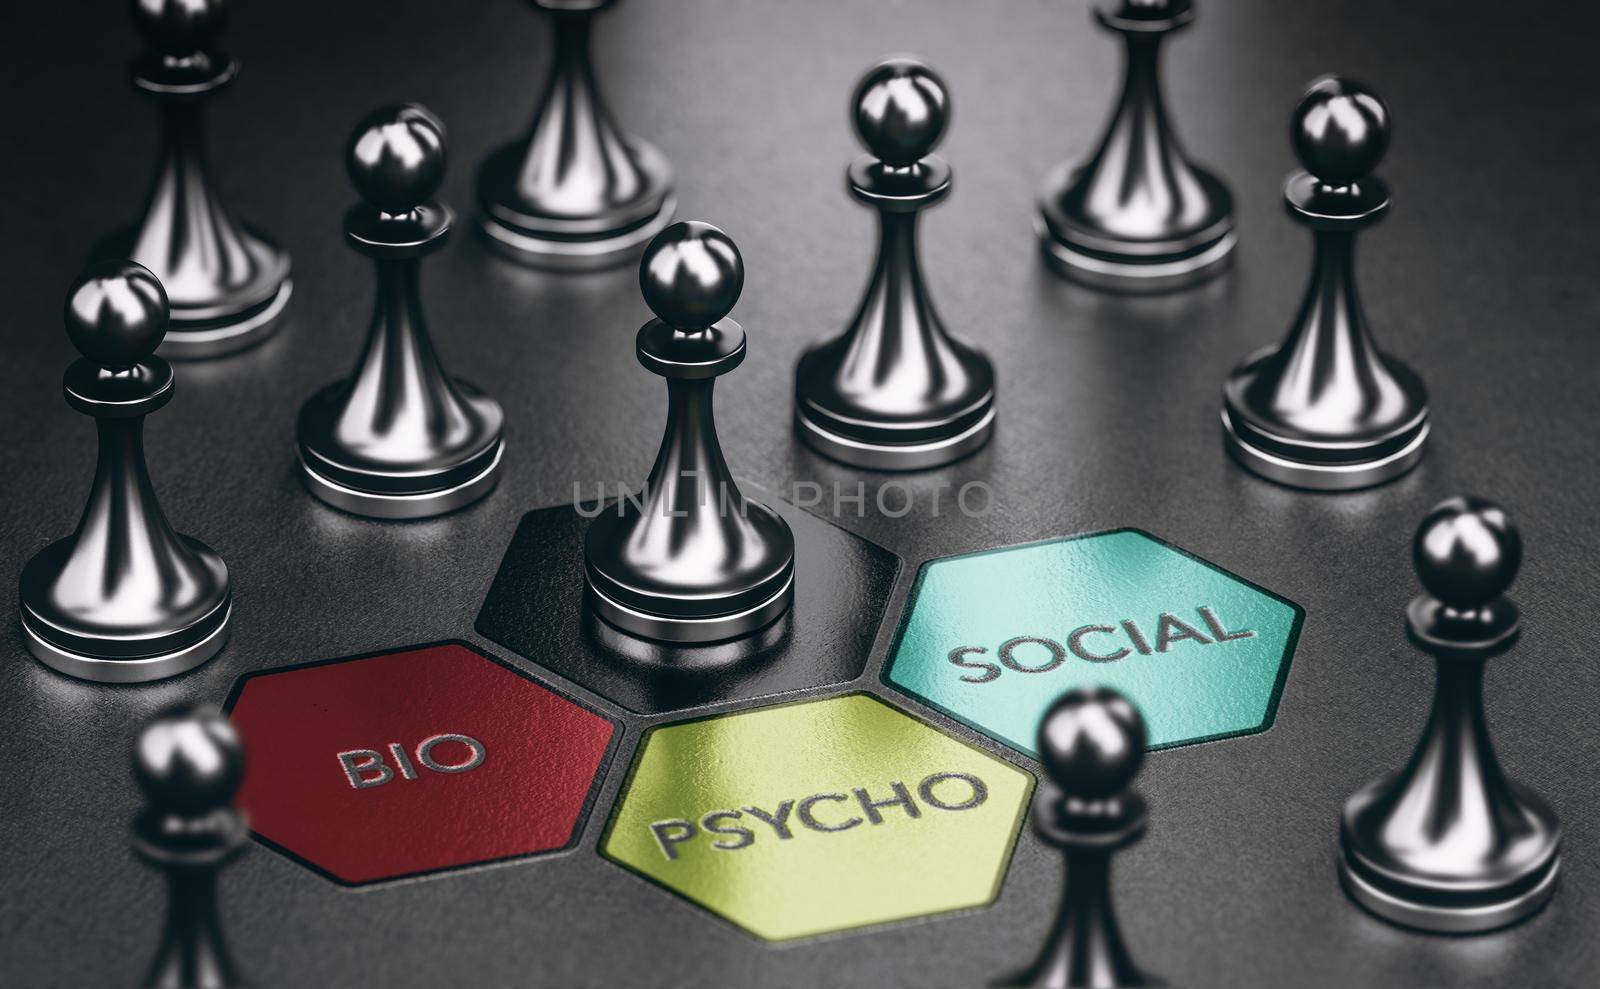 Pawns over black background with the text bio, psycho and social. Biopsychosocial model concept. Mental health approach. 3D illustration.